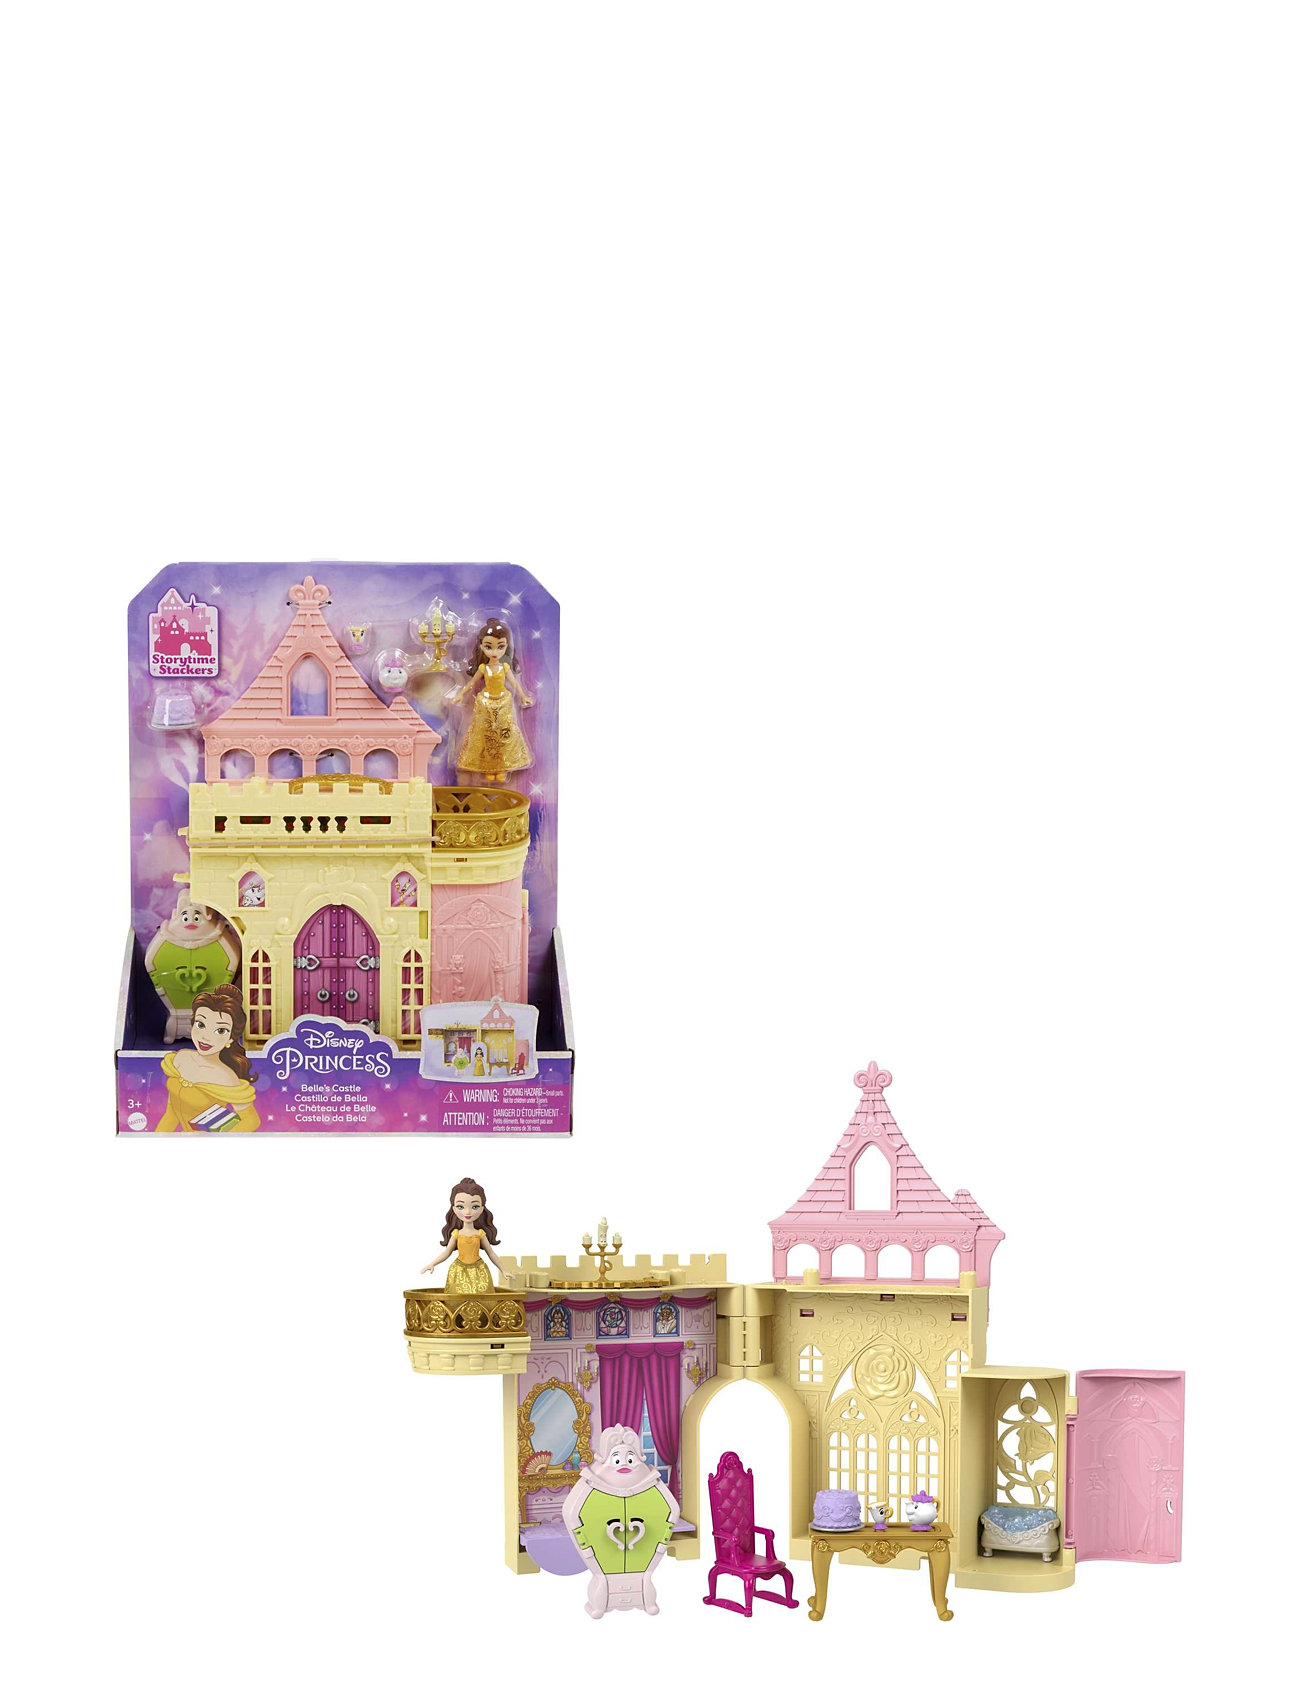 Disney Princess Storytime Stackers Belle's Castle Toys Dolls & Accessories Doll Houses Multi/patterned Disney Princess